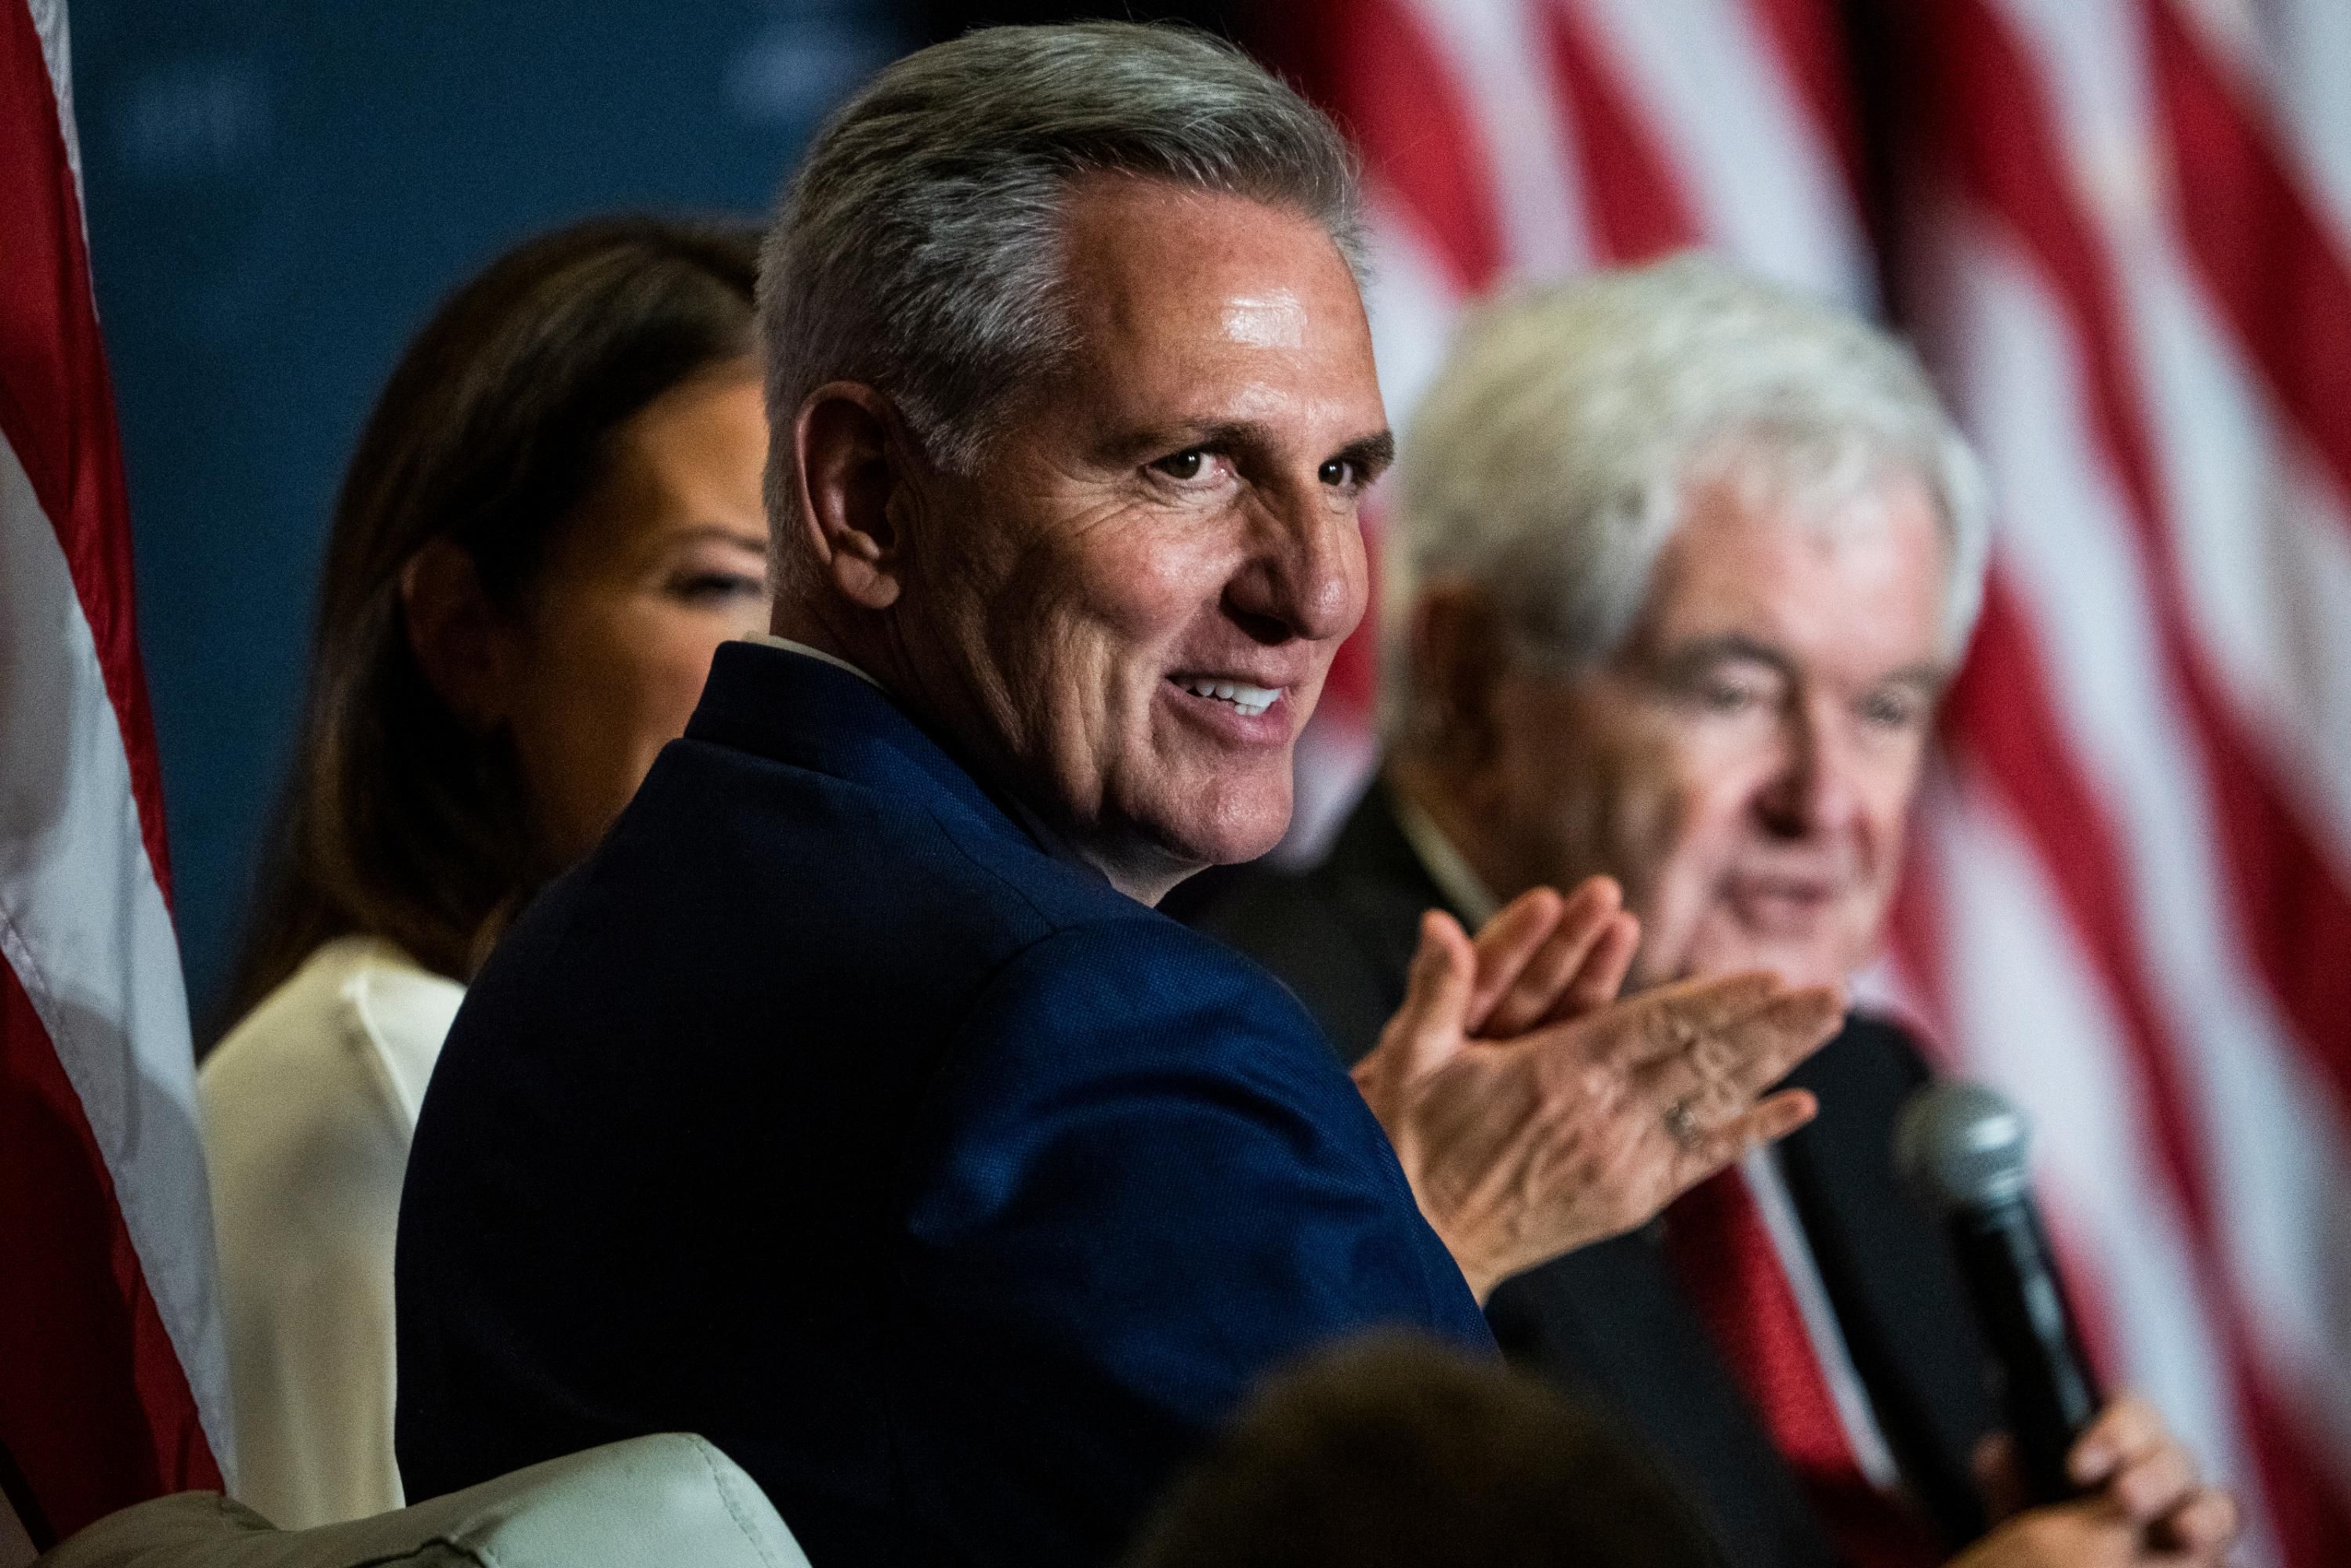 House Minority Leader Kevin McCarthy participates in an event with Newt Gingrich